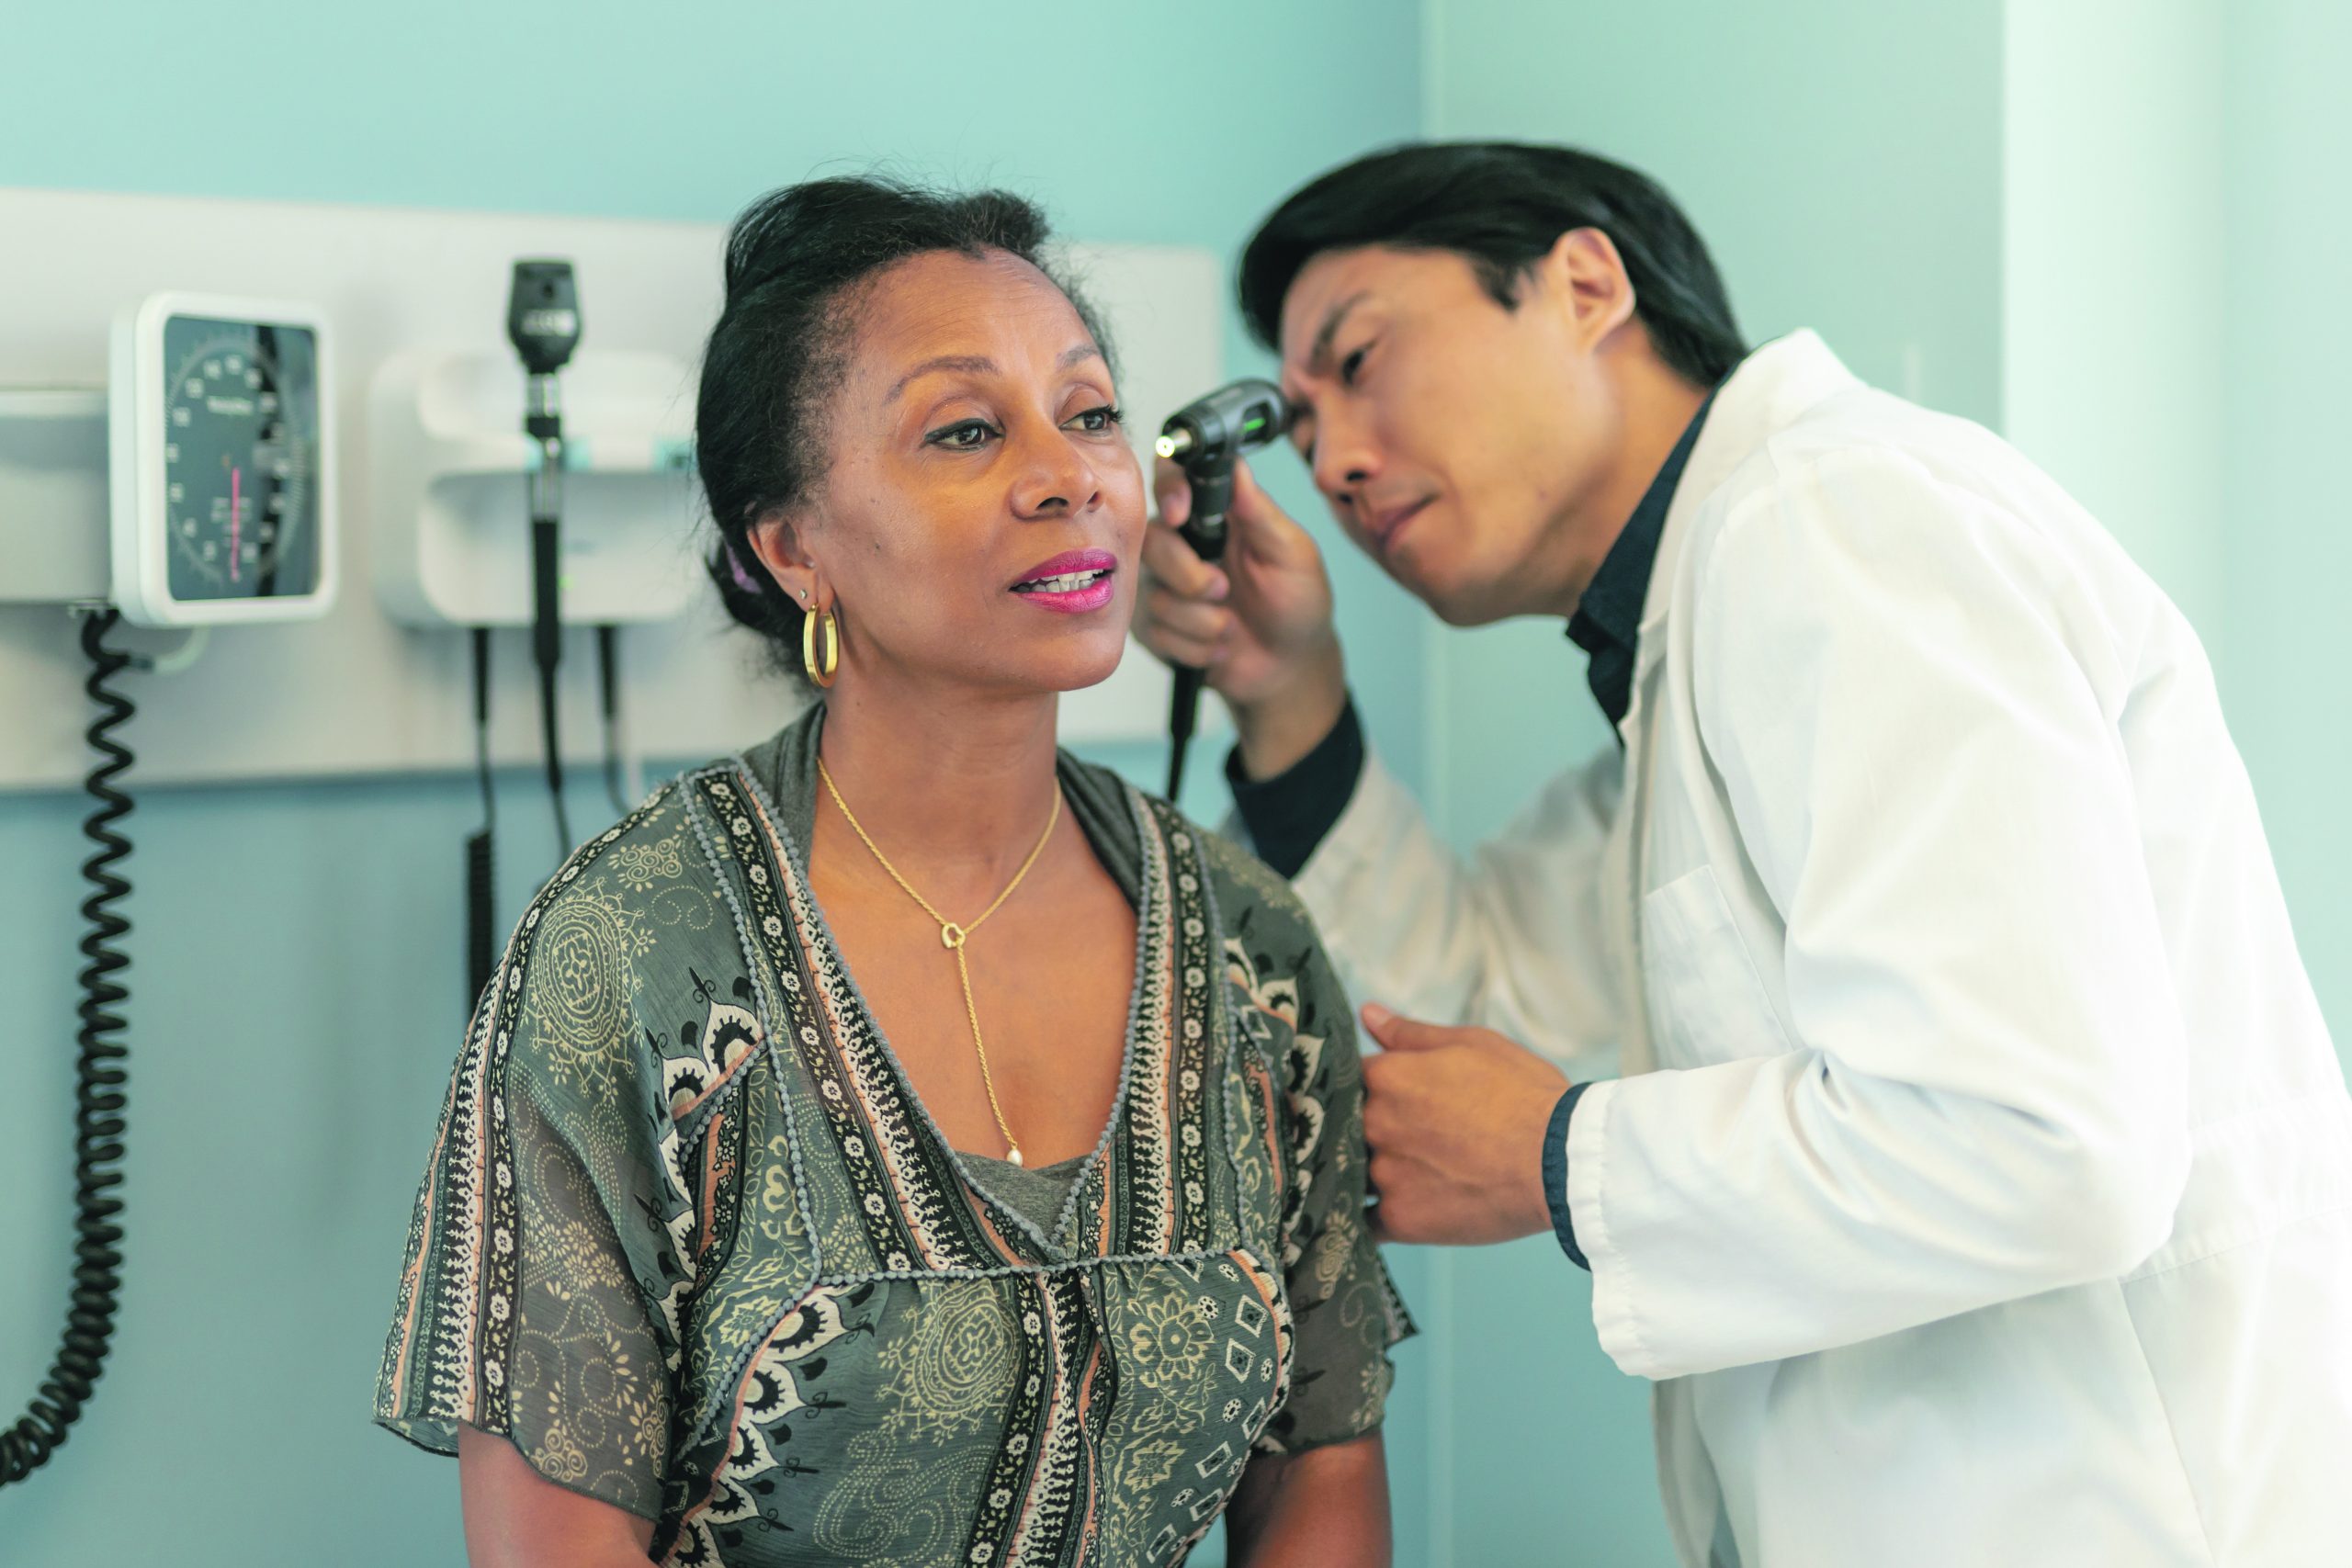 In a clinic, a Korean doctor examines a patient's ears for hearing loss.